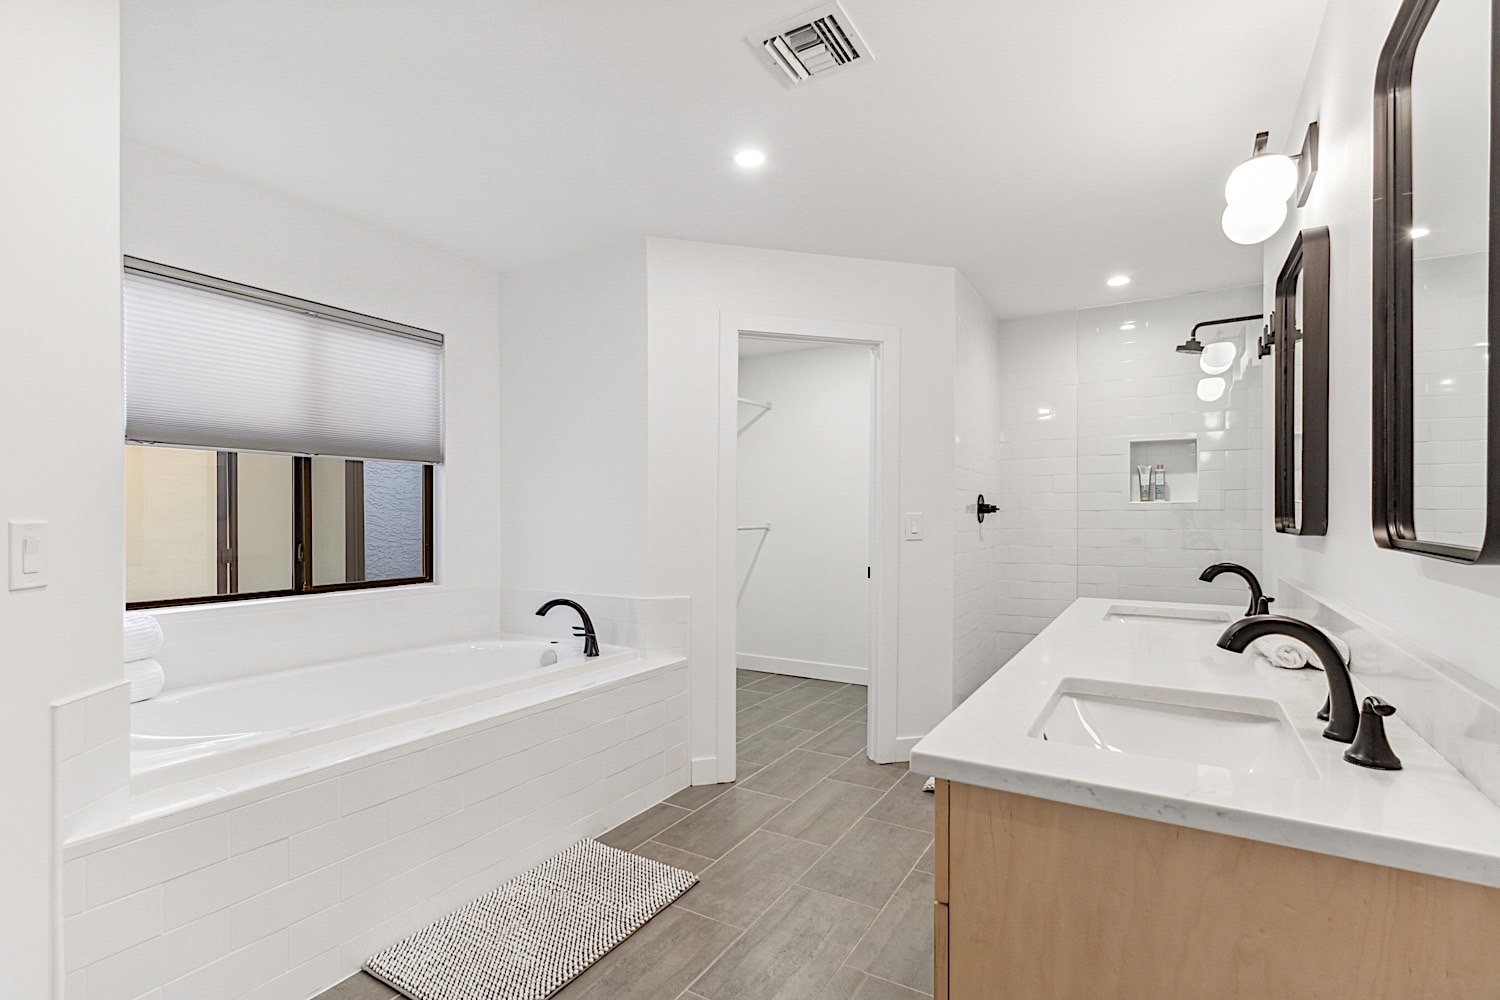 Master bathroom - Large soaking tub, walk-in shower, his & hers sinks and dual walk-in closets